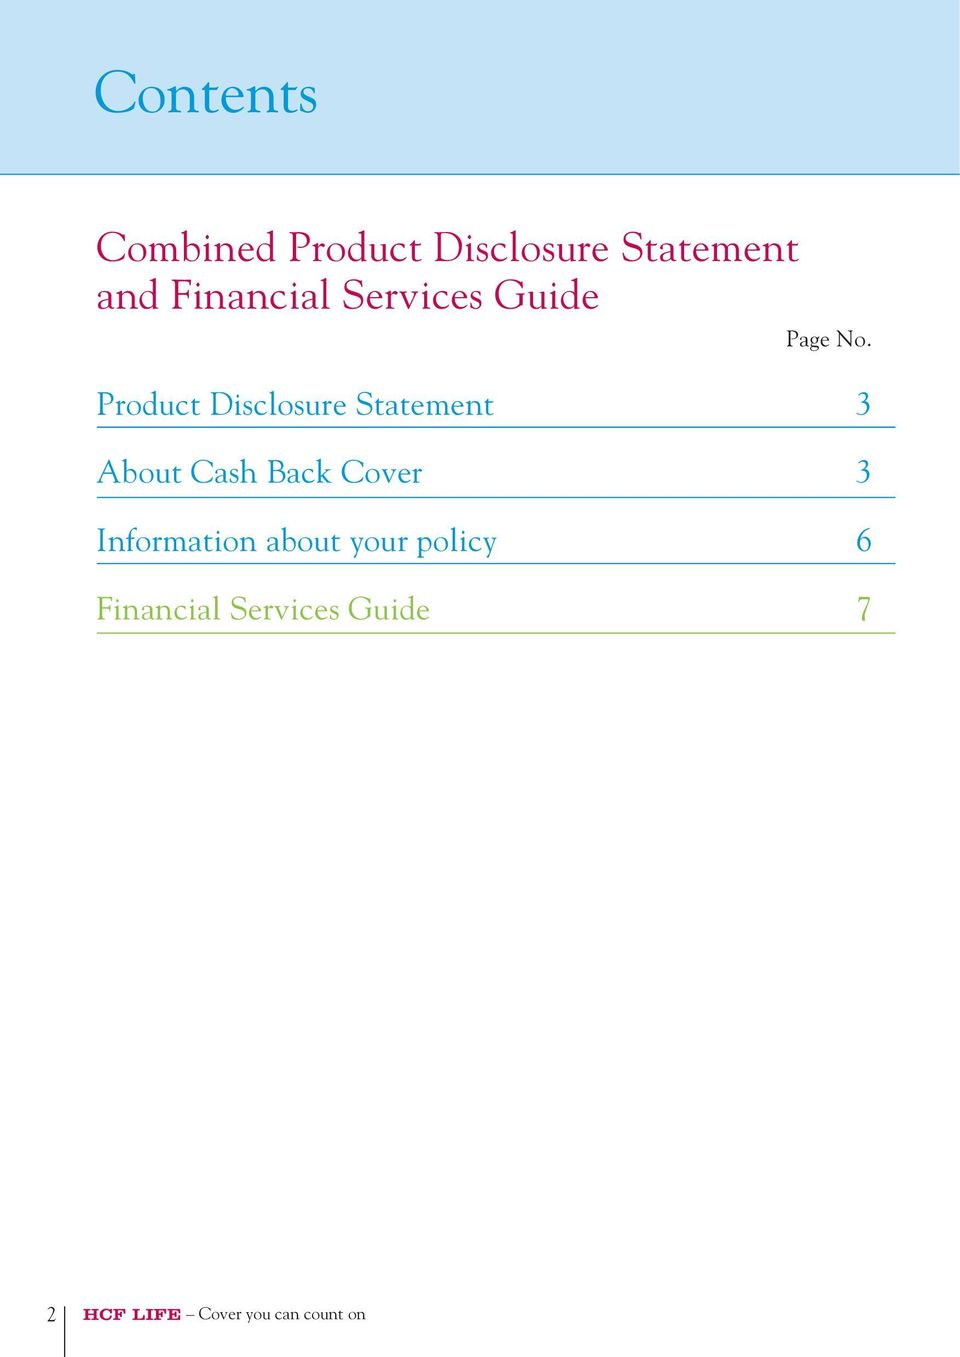 Product Disclosure Statement 3 About Cash Back Cover 3